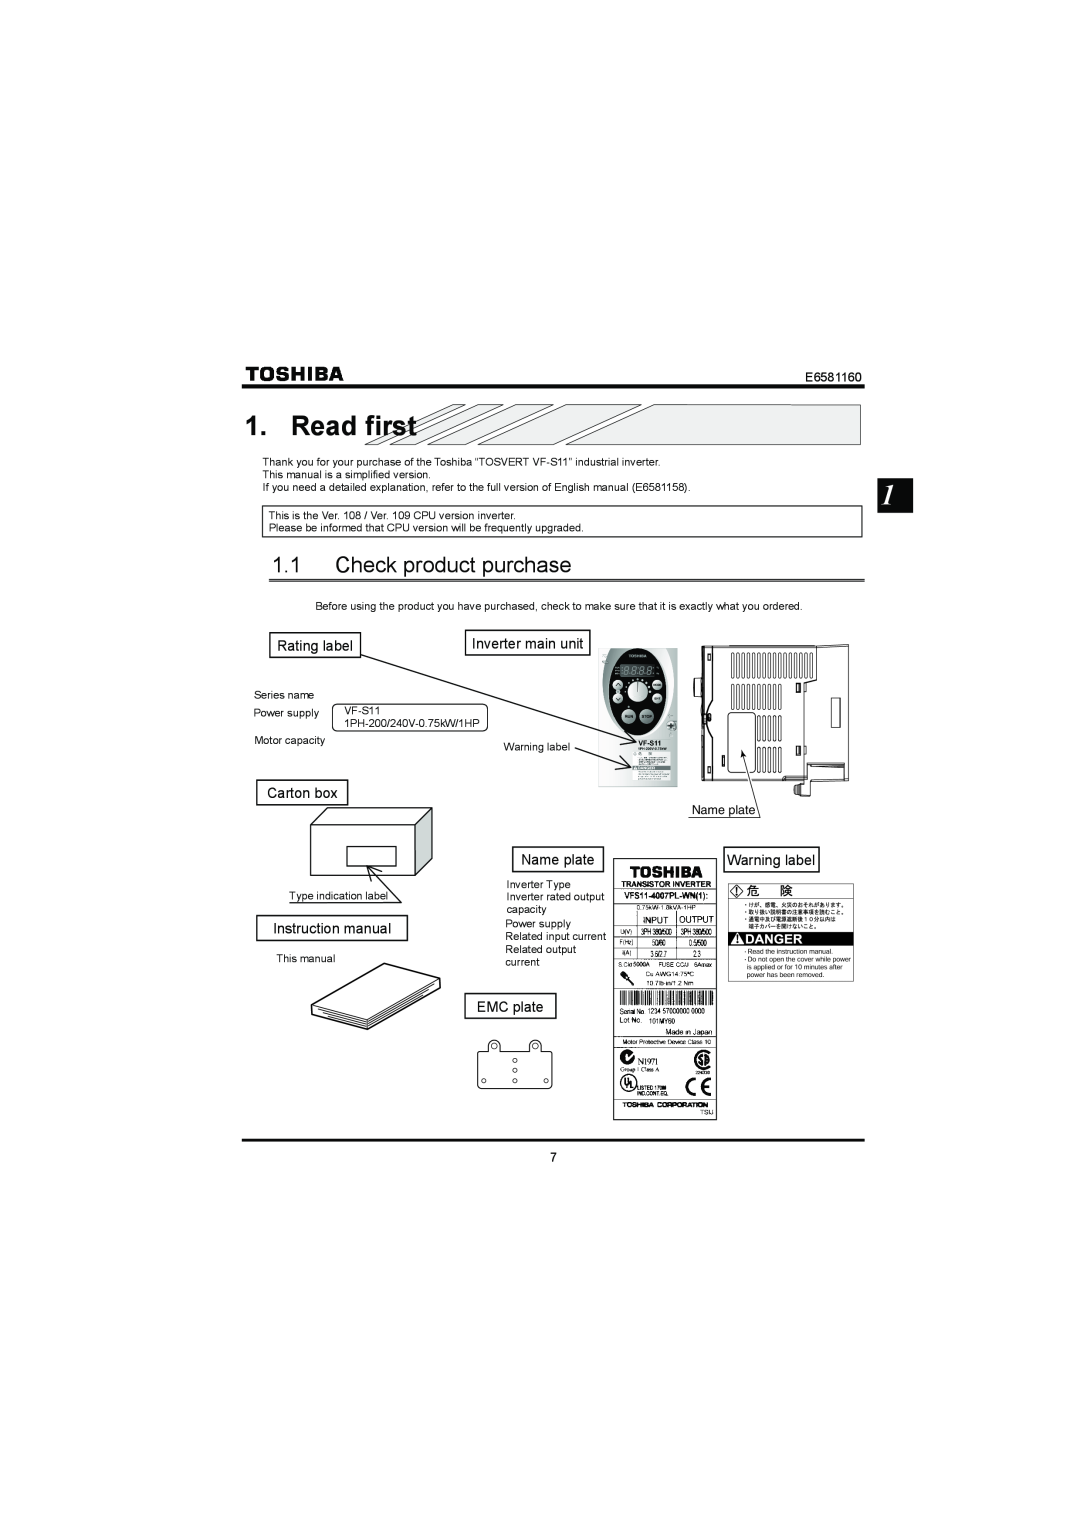 Toshiba VF-S11 manual Read first, 1.1Check product purchase, E6581160 